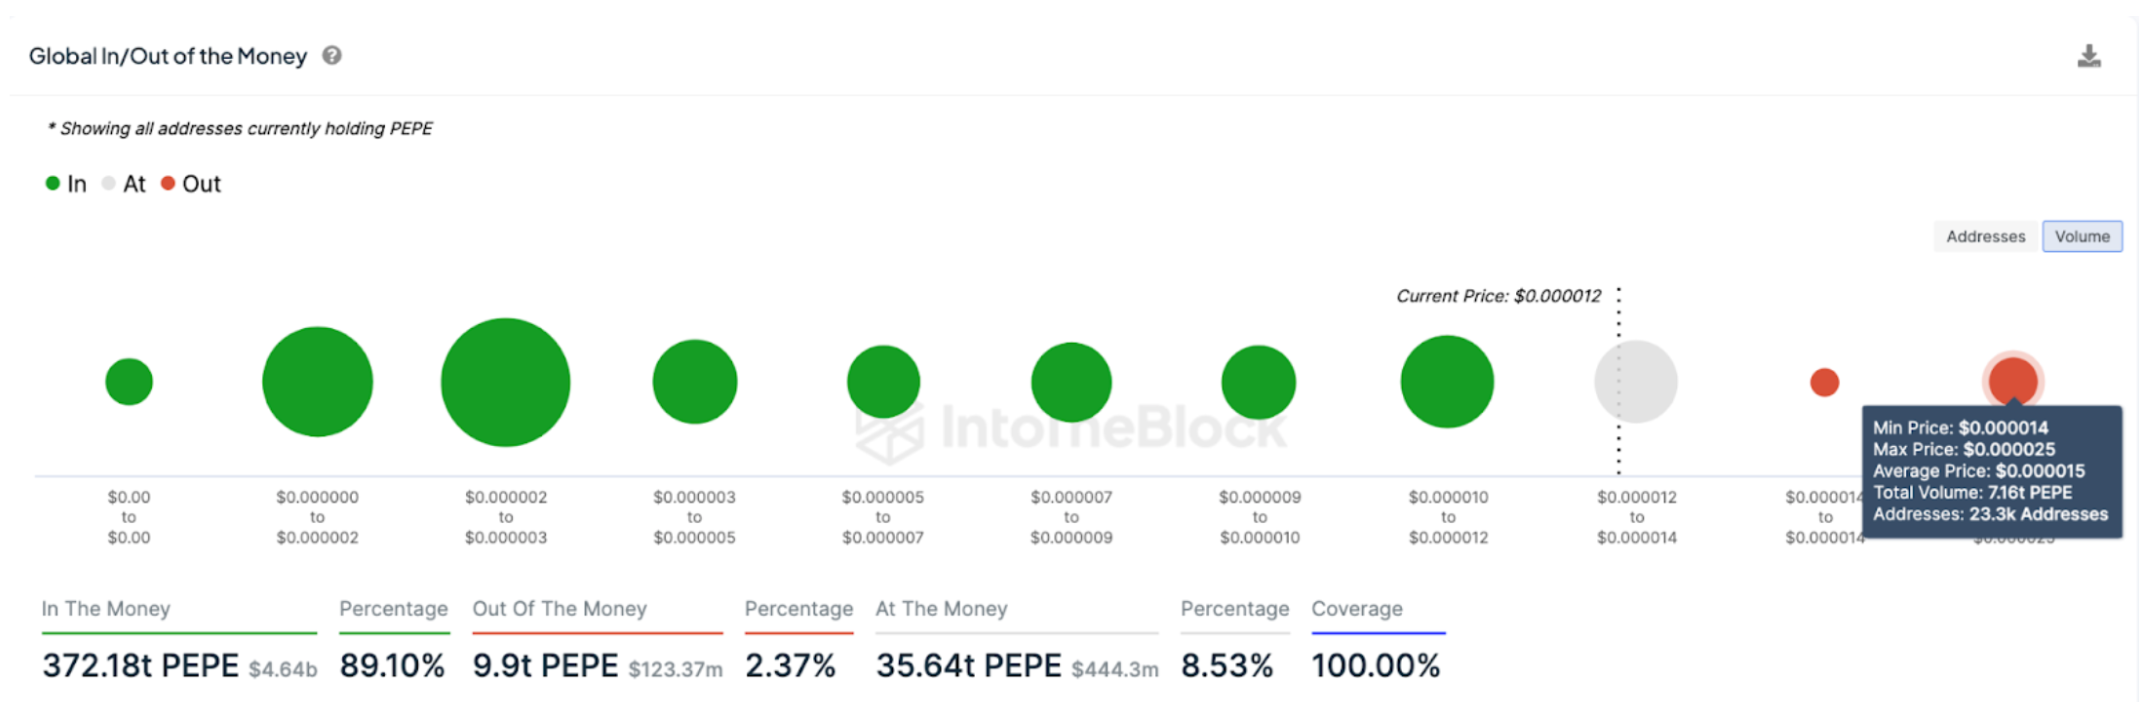 PEPE Price Forecast | Global In/Out of the Money data, June 2024 | Source: IntoTheBlock